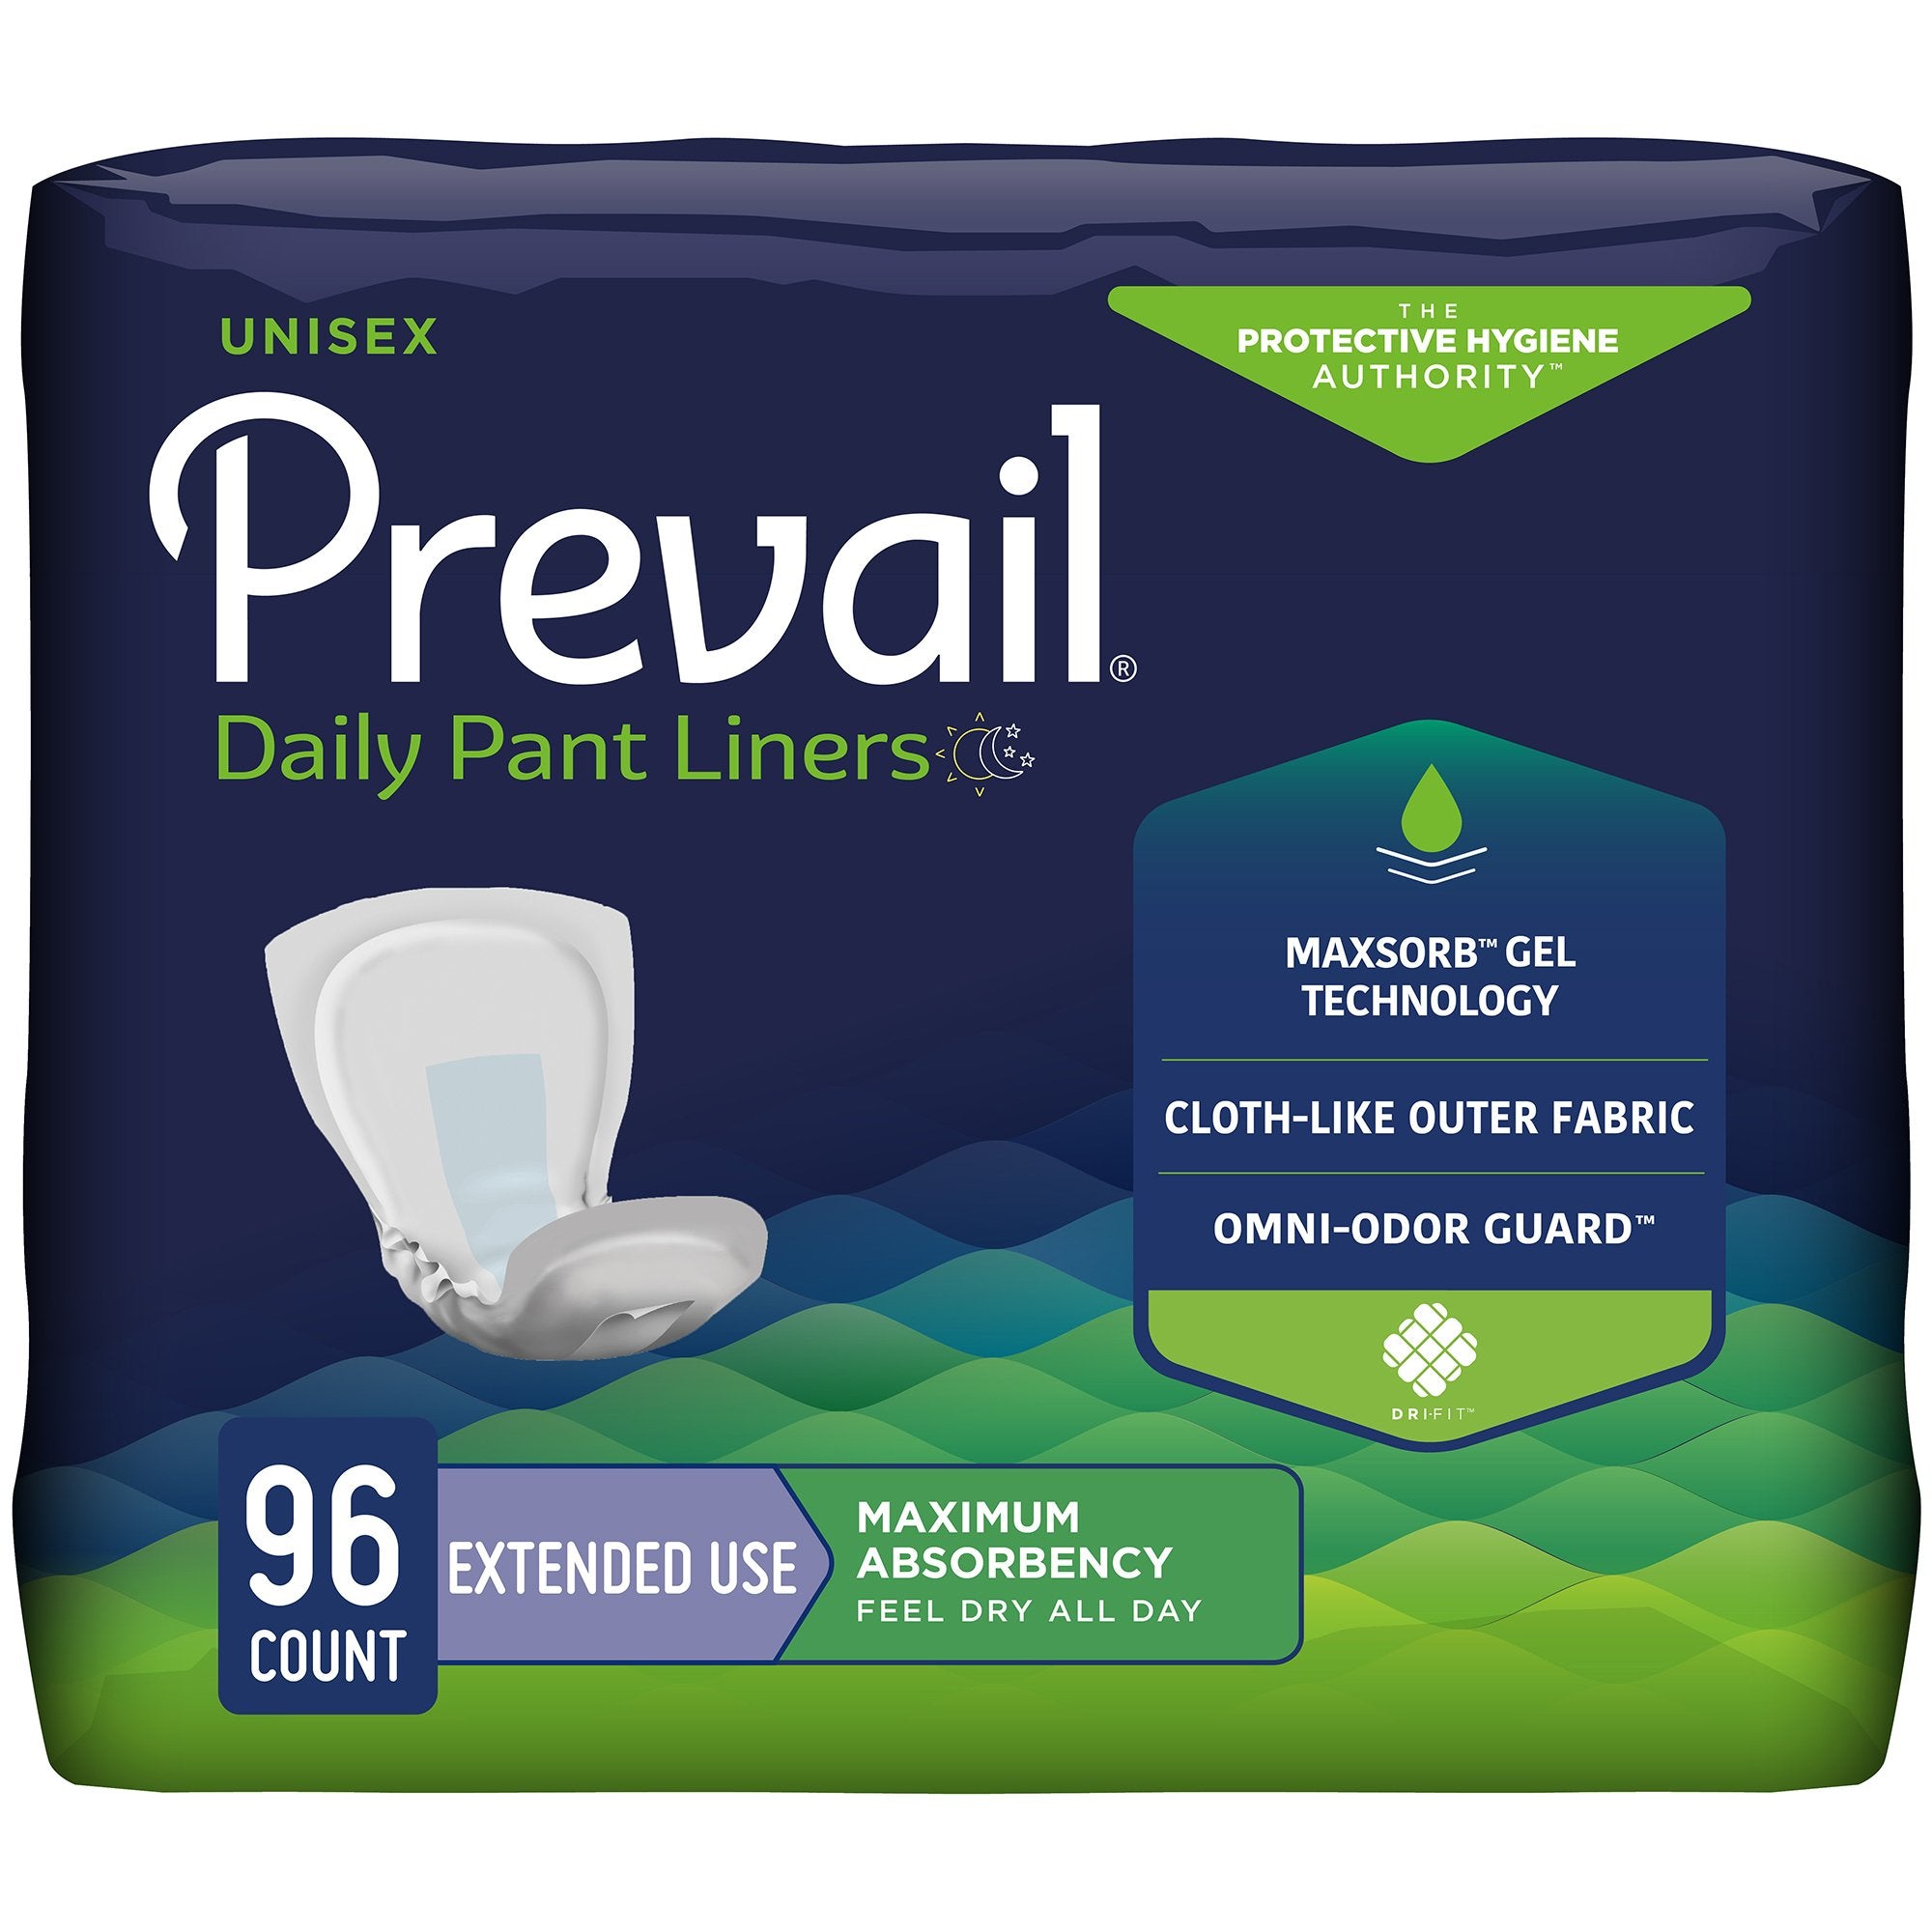 Incontinence Liner Prevail Daily Pant Liners 28 Inch Length Heavy Absorbency Polymer Core One Size Fits Most